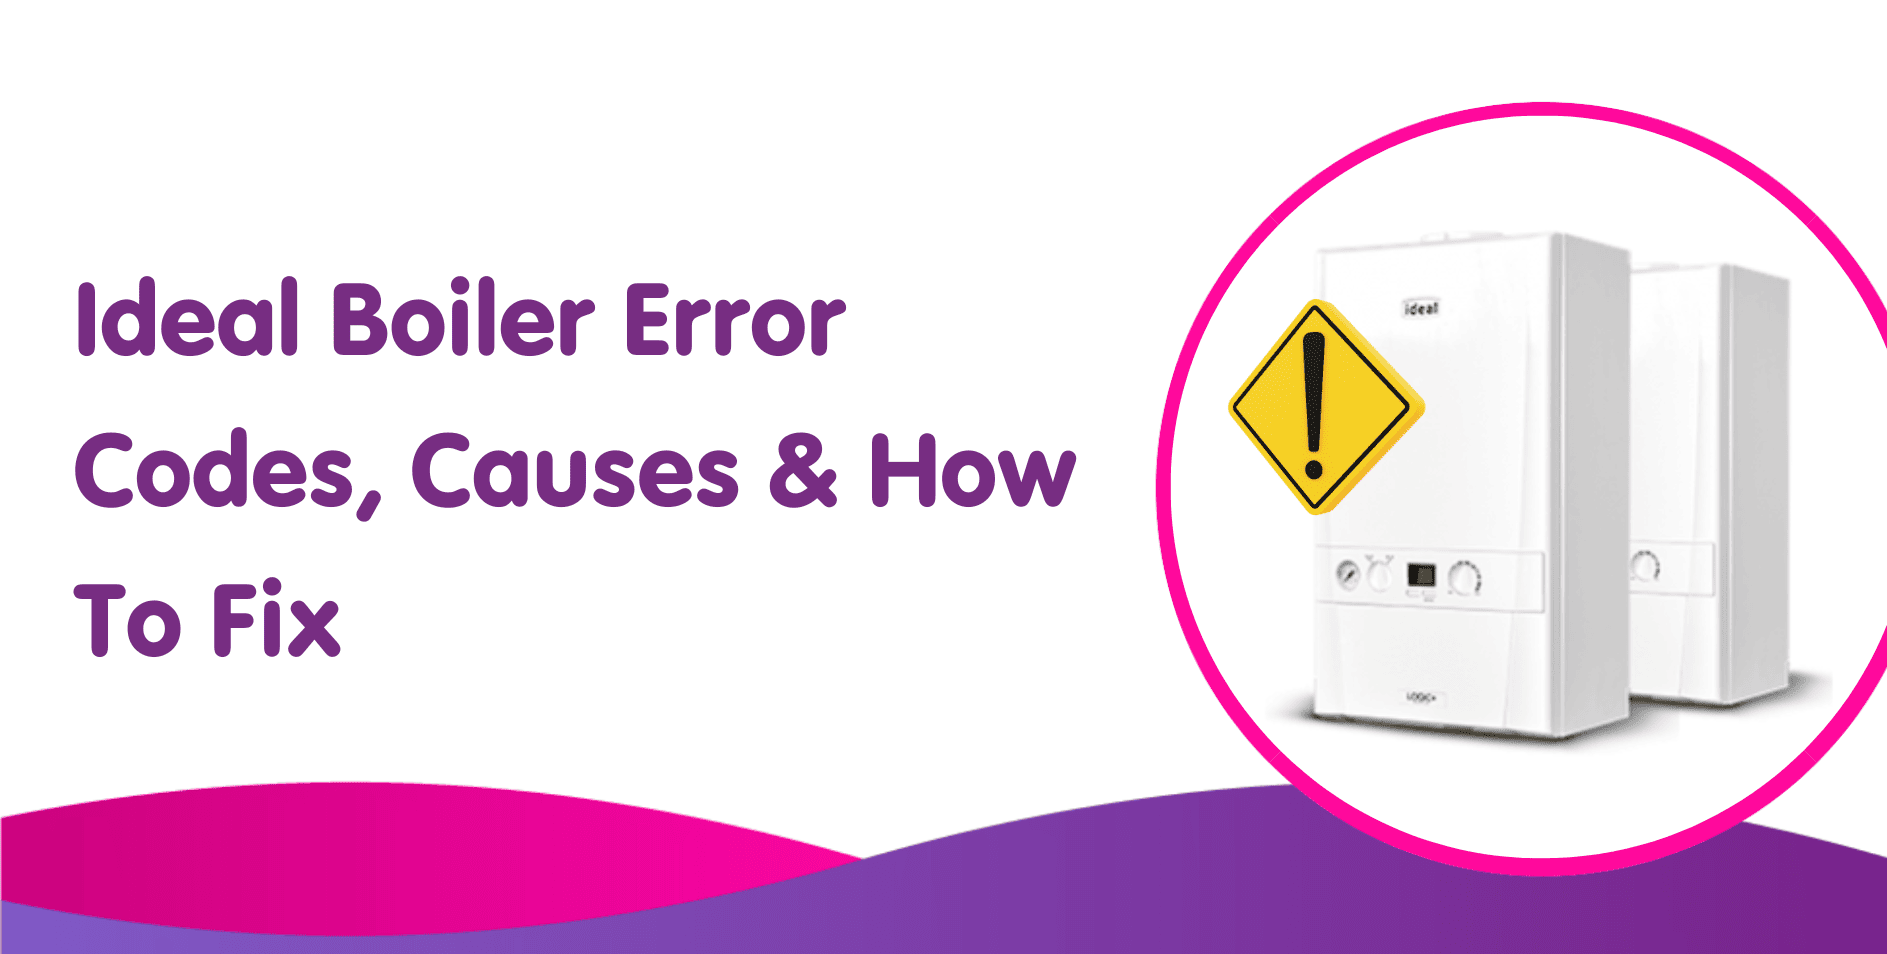 Ideal Boiler Error Codes, Causes & How To Fix